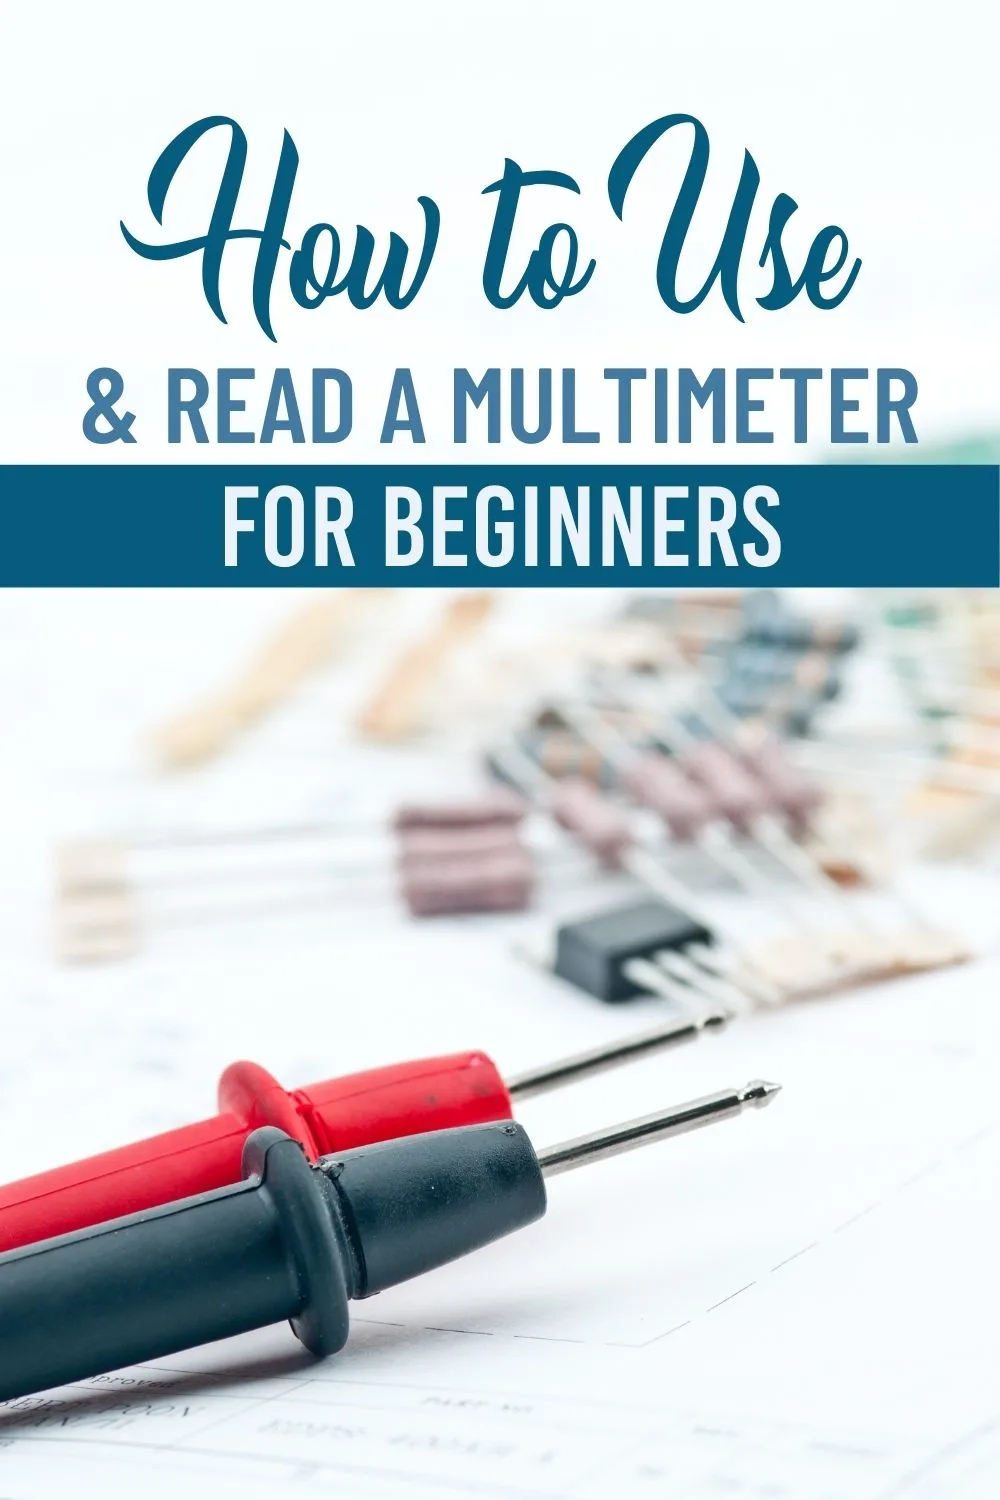 How to Use & Read a Multimeter for Beginners pin image